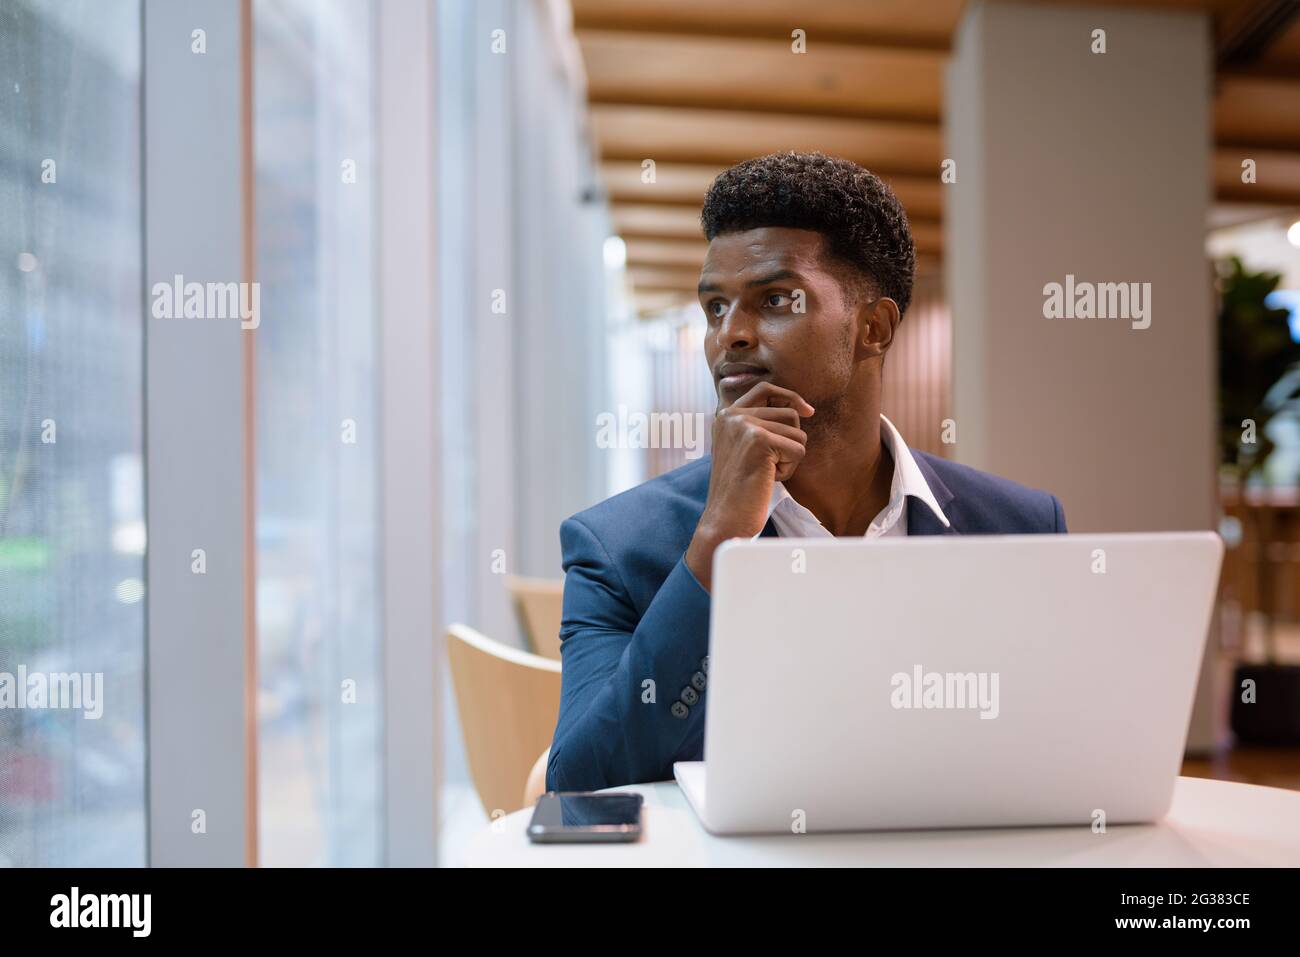 Portrait of African businessman using laptop computer in coffee shop while looking through window horizontal shot Stock Photo